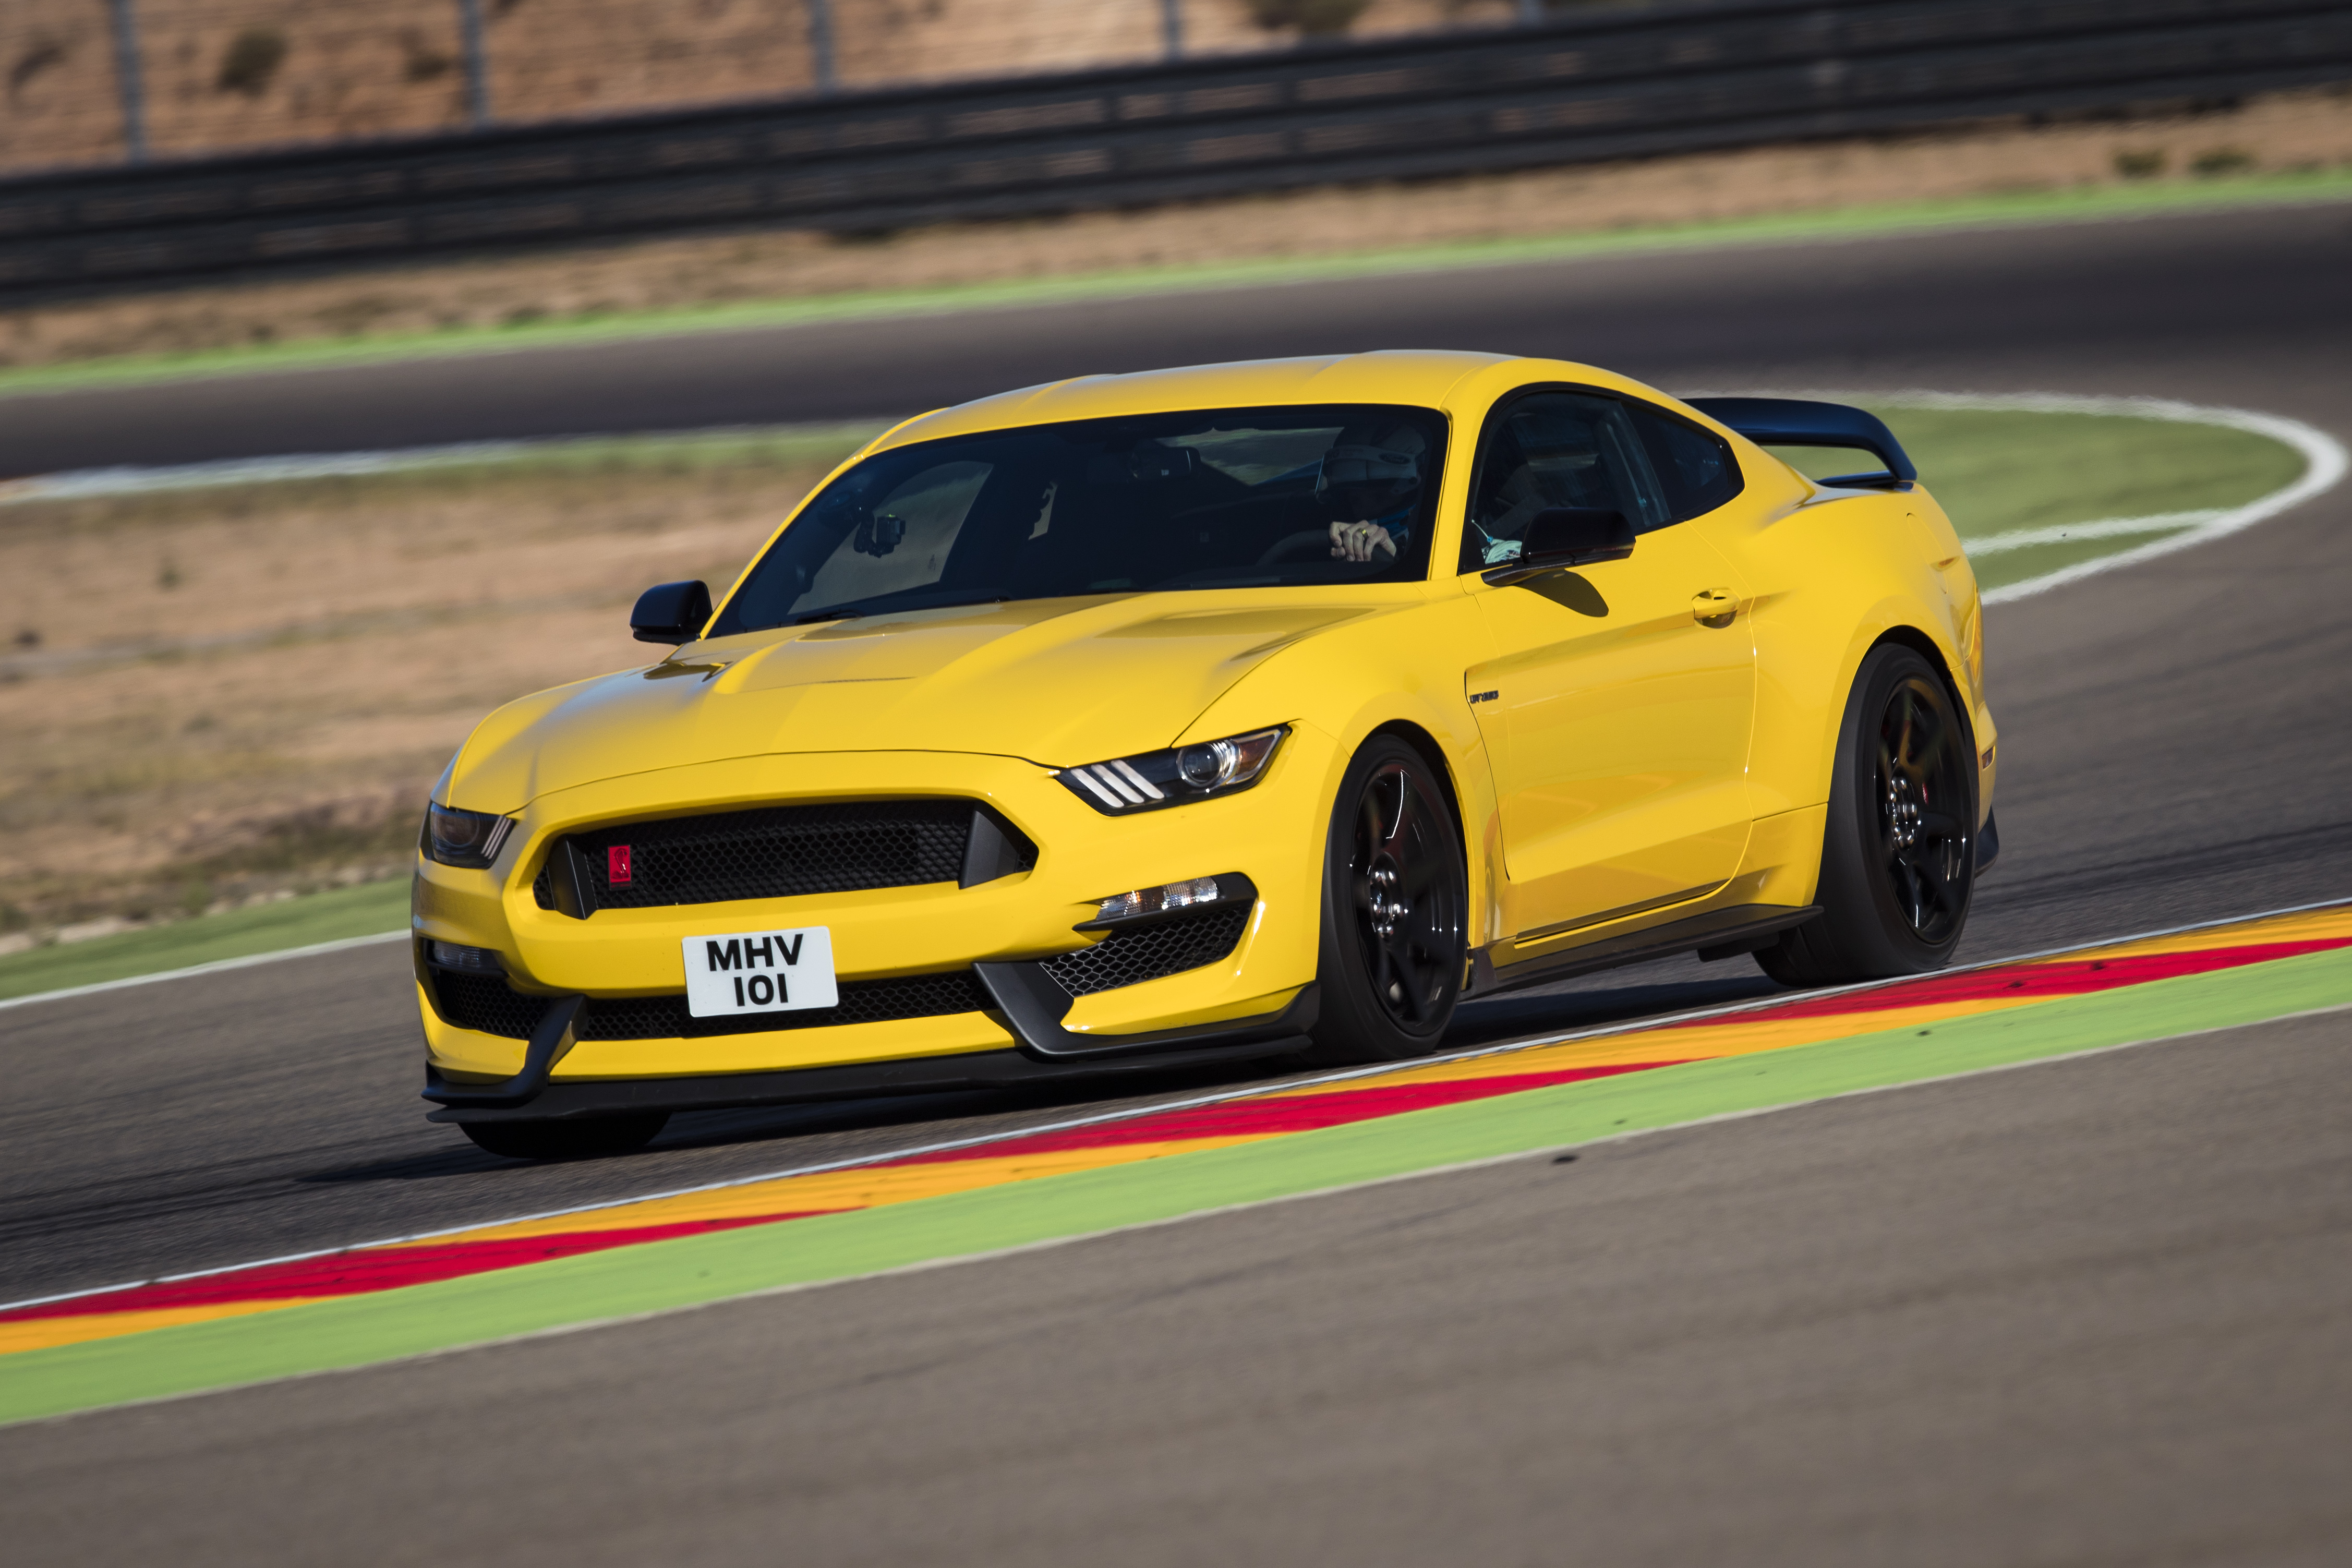 Ford Mustang Shelby Gt350 4509x3006